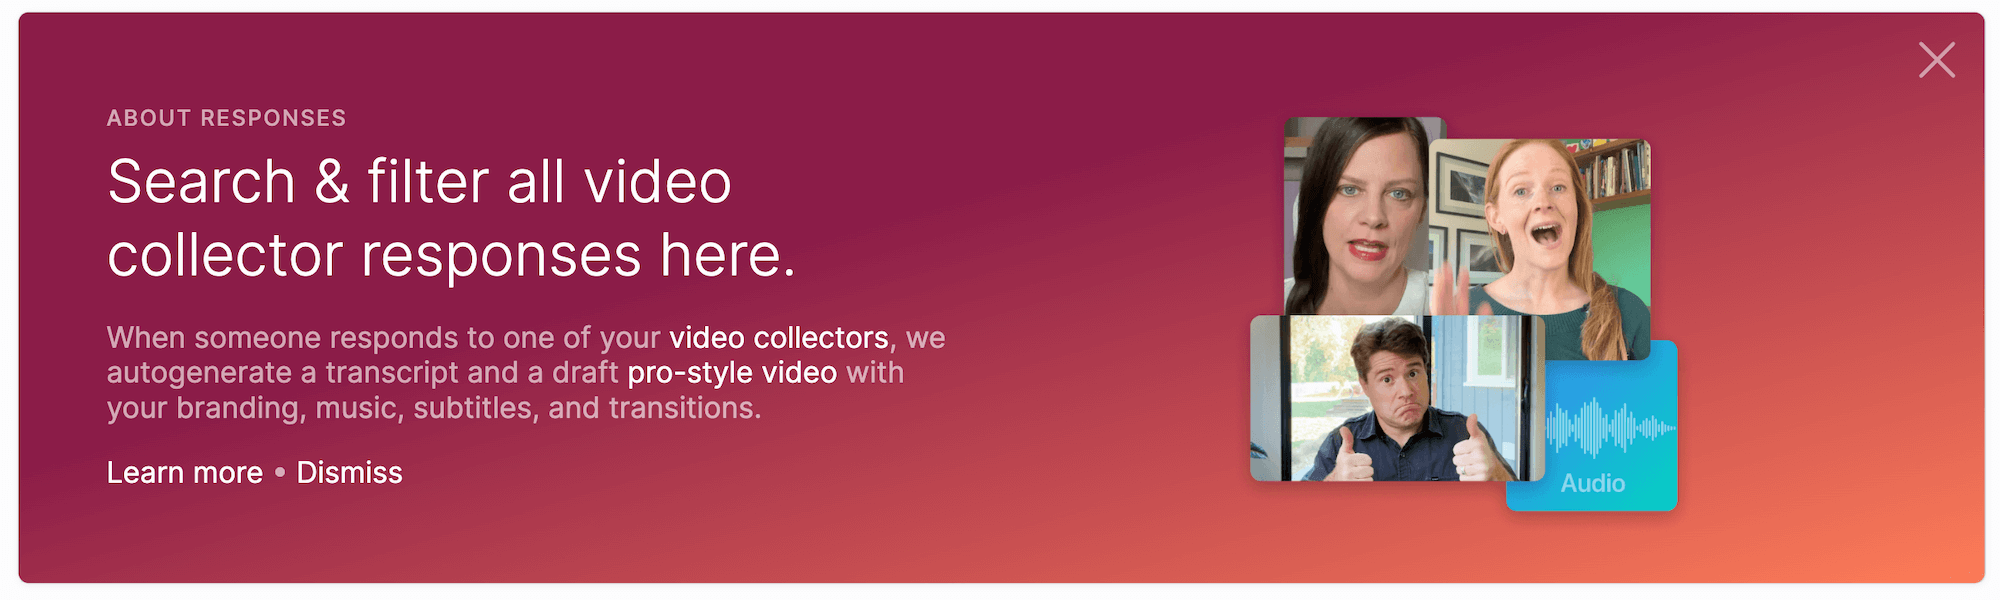 Search & filter all video collector responses here